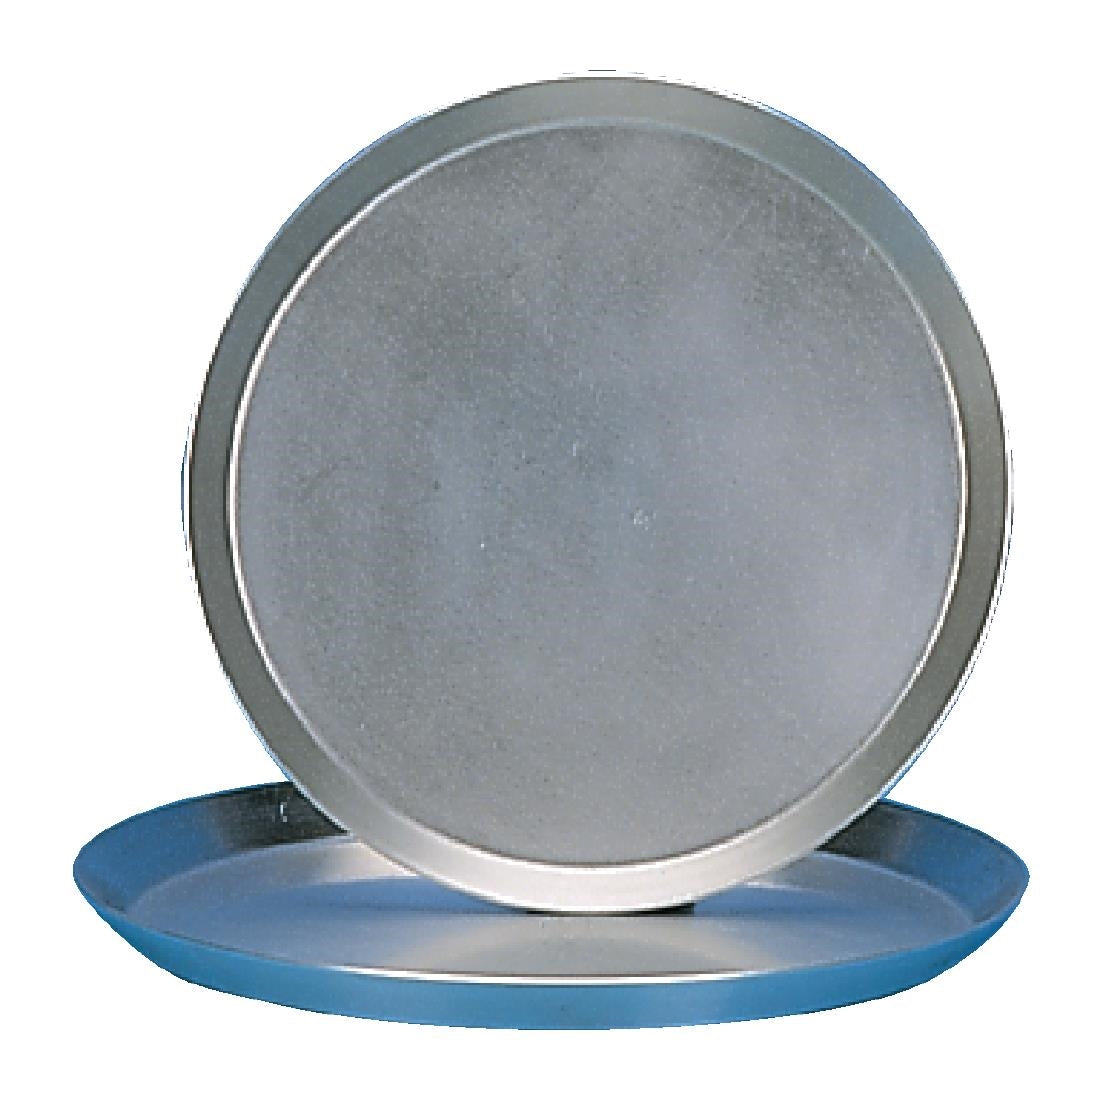 F005 Tempered Deep Pizza Pan 10in JD Catering Equipment Solutions Ltd